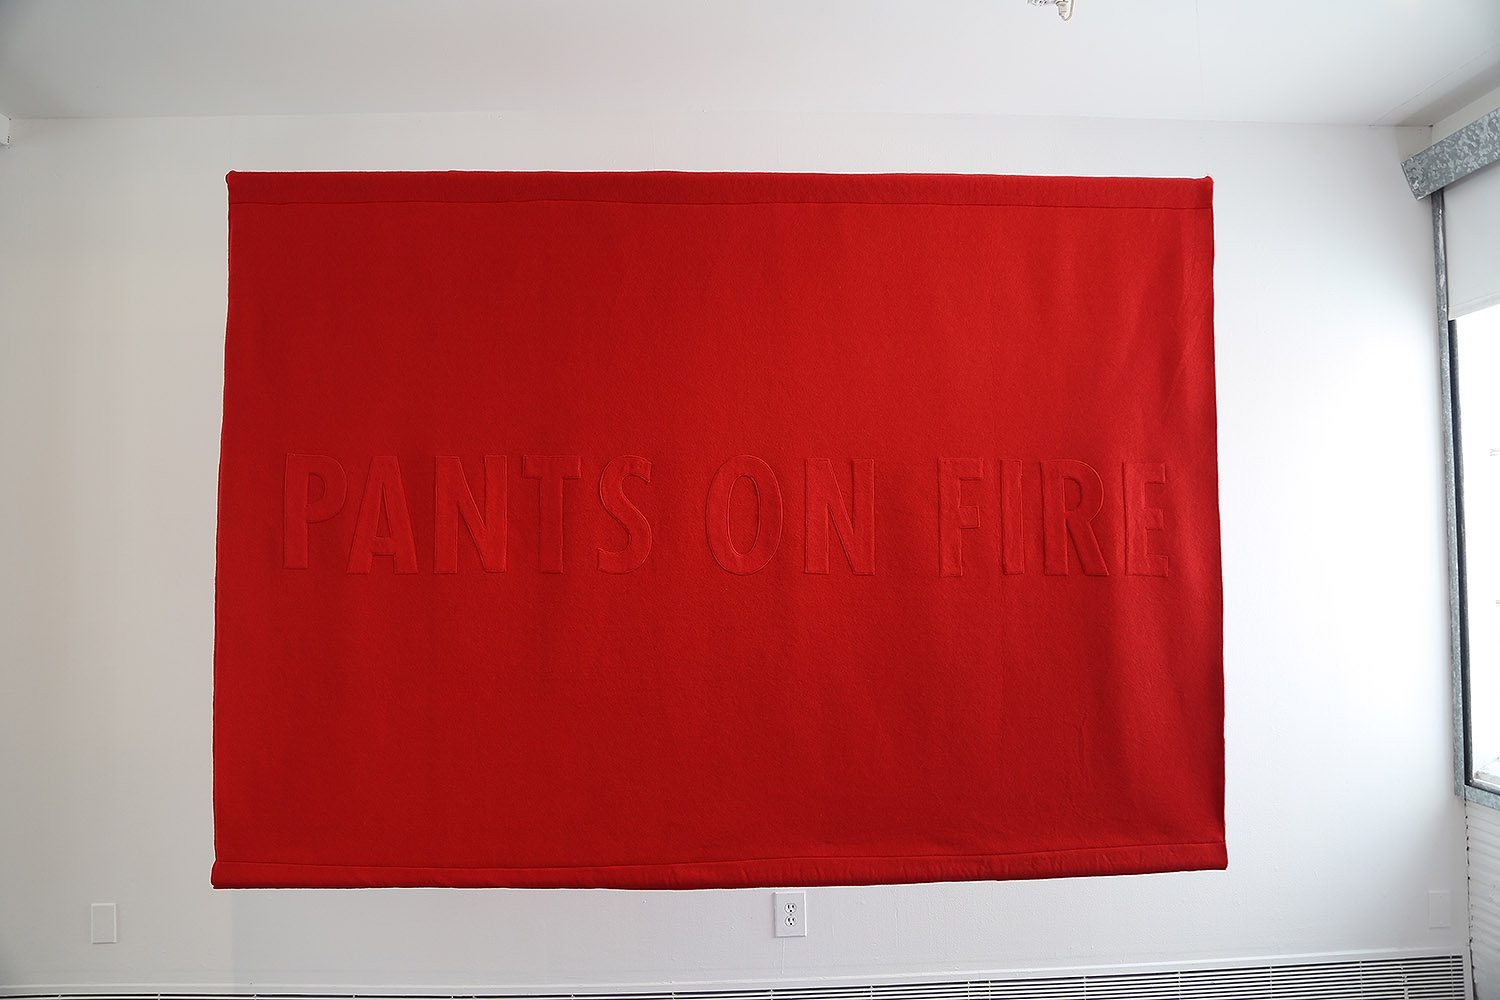 A banner by Jenny Holzer on display in the "Word on the Street" exhibition at Artpace.